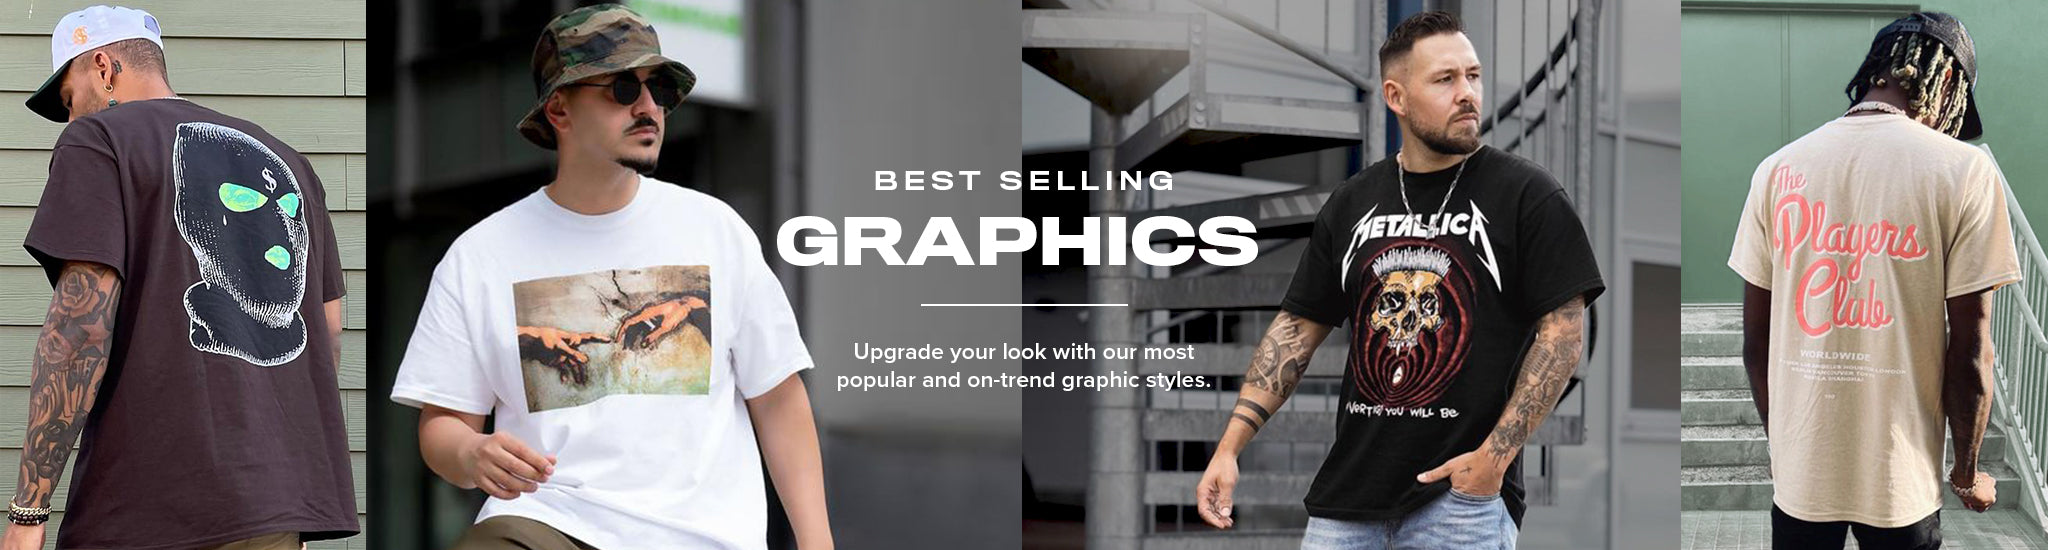 Men's Best Selling Graphic T-Shirts